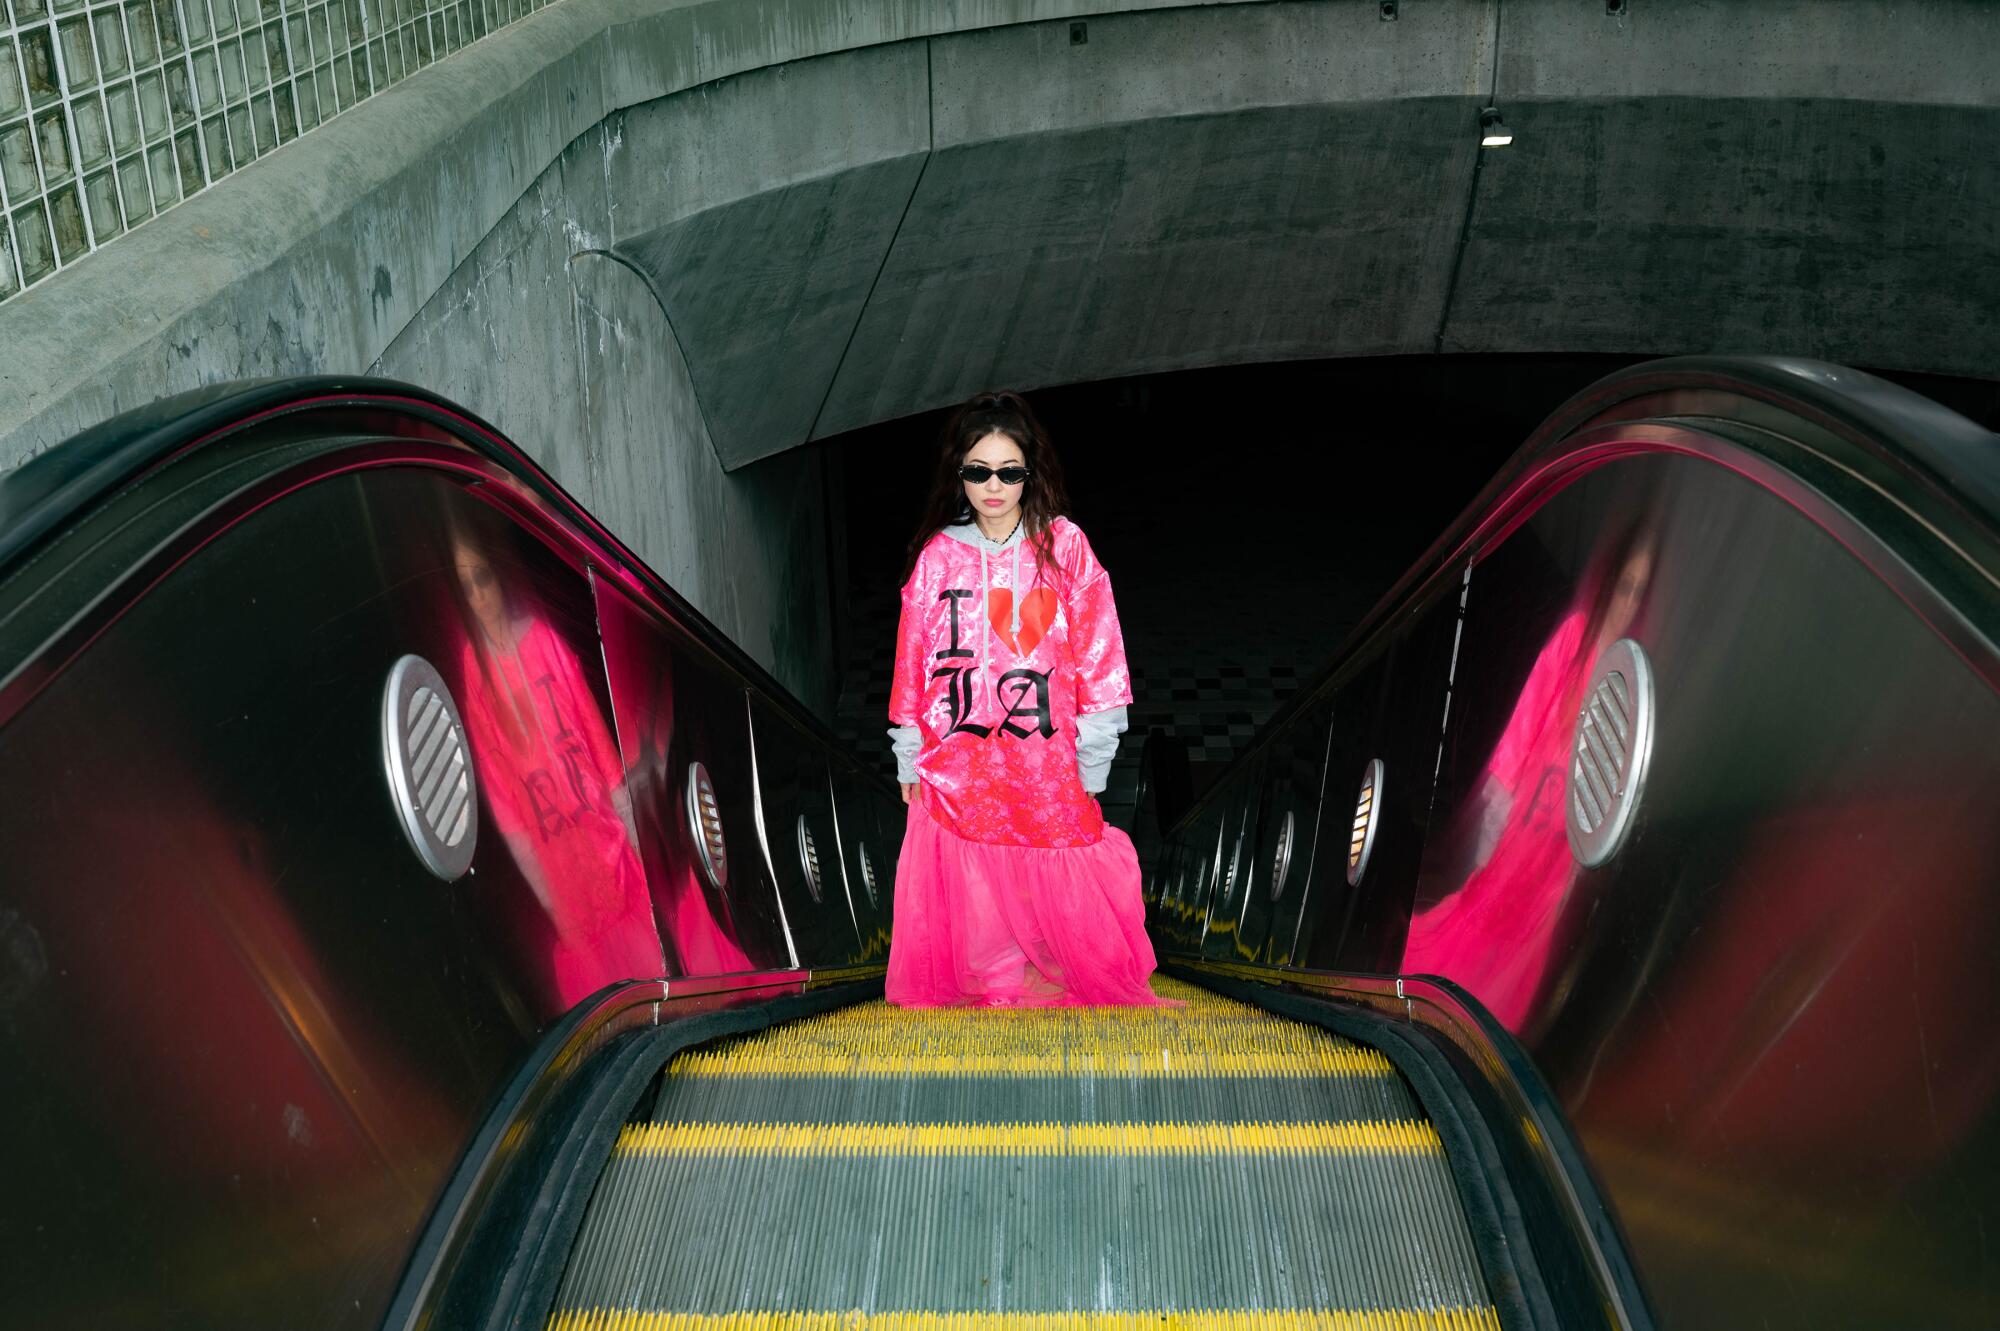 A model in a hot-pink outfit, reflected on either side so there appear to be three of her